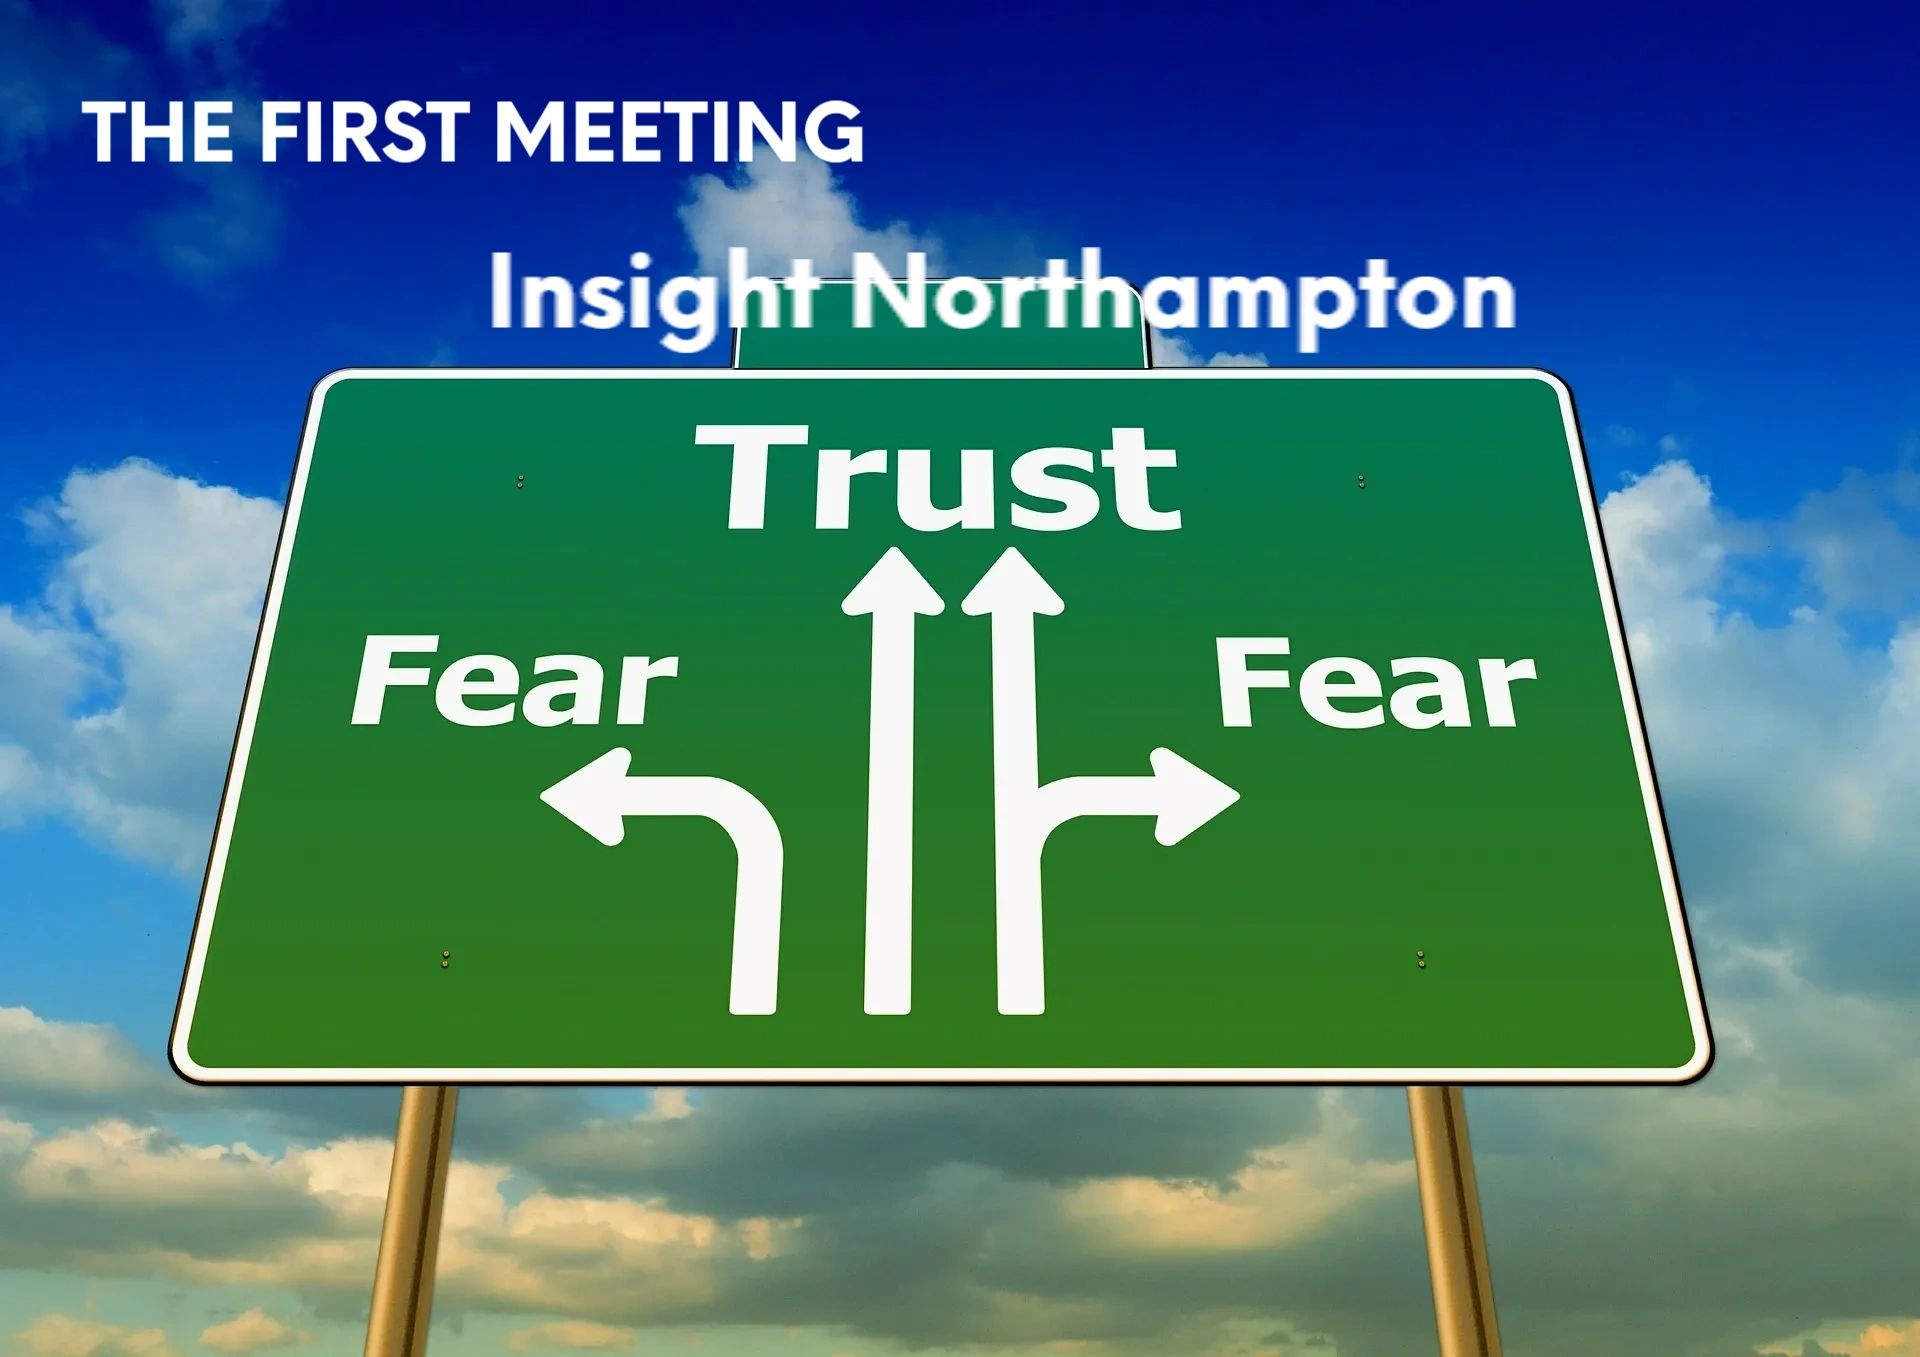 First meeting images -Insight Northampton counselling services show that trust will overcome any fea